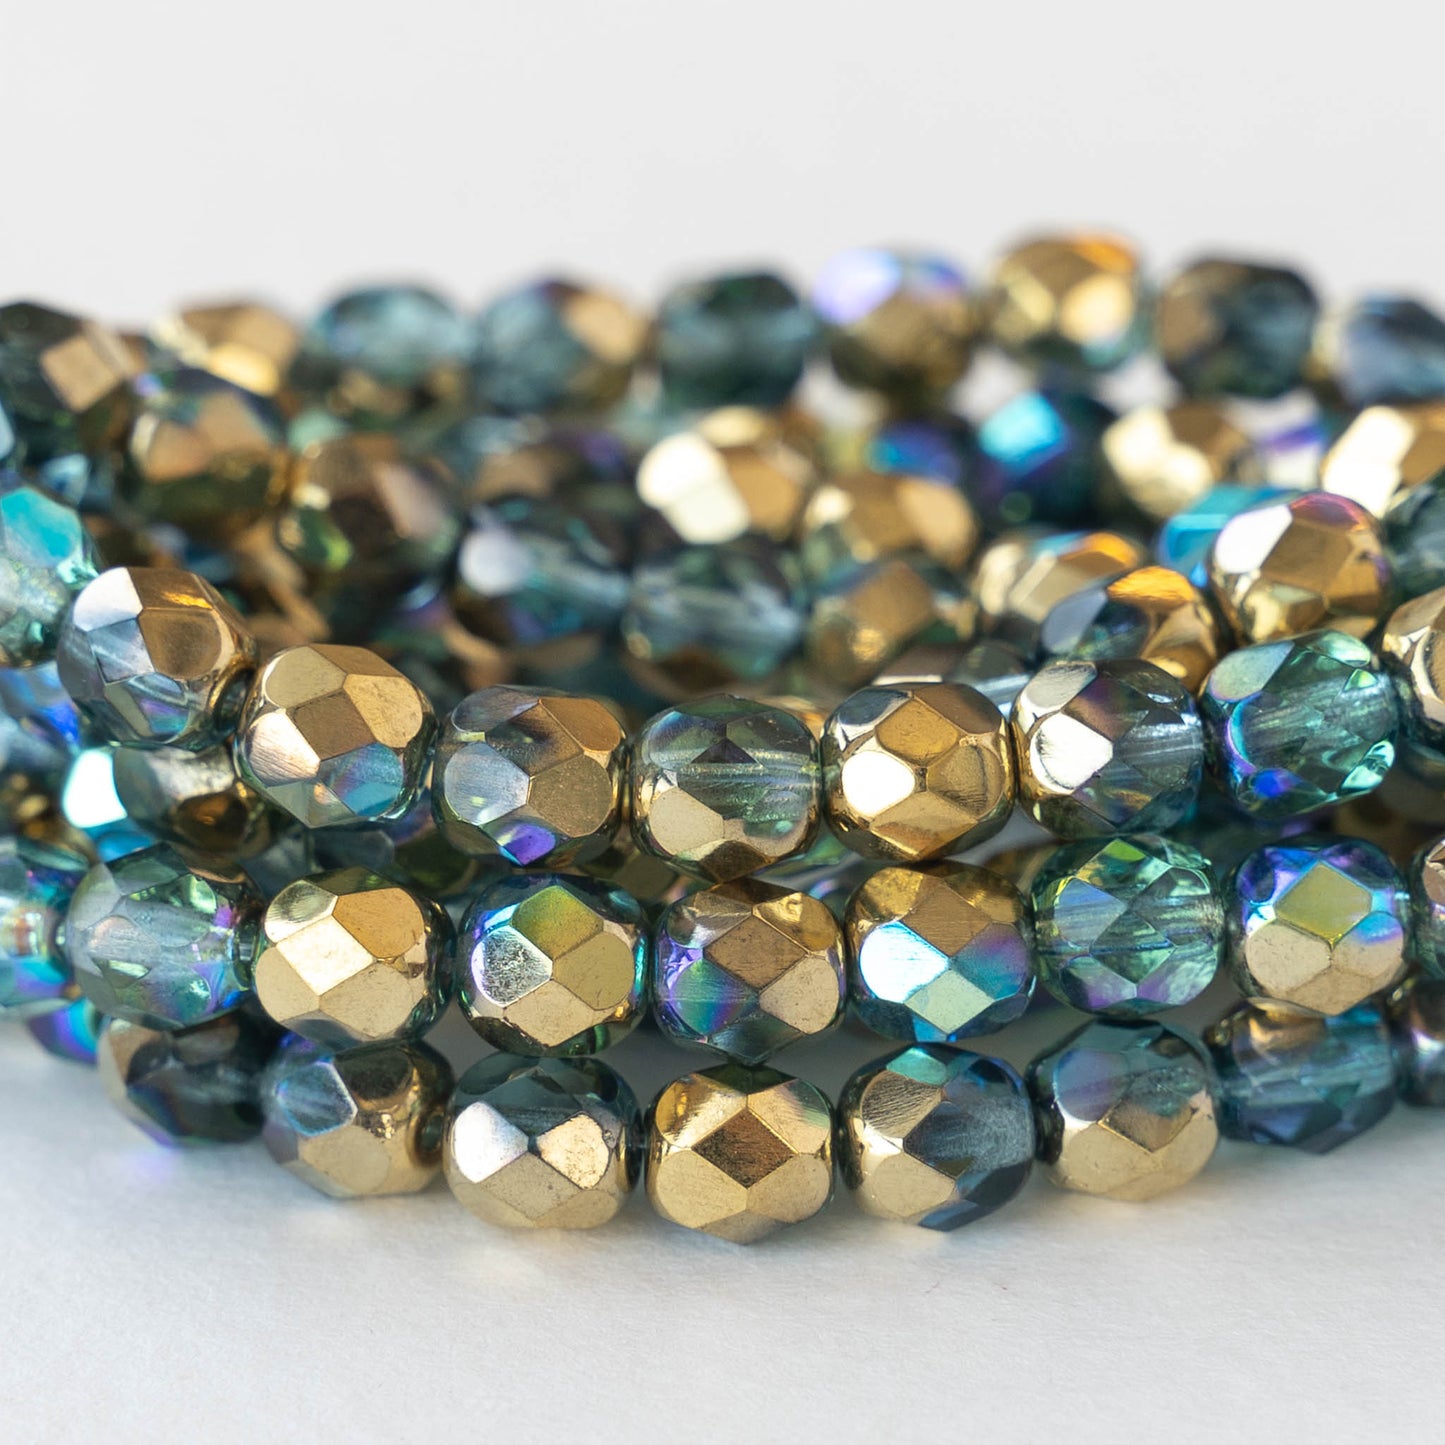 6mm Faceted Round Beads - Aqua with AB and Gold  - 25 beads